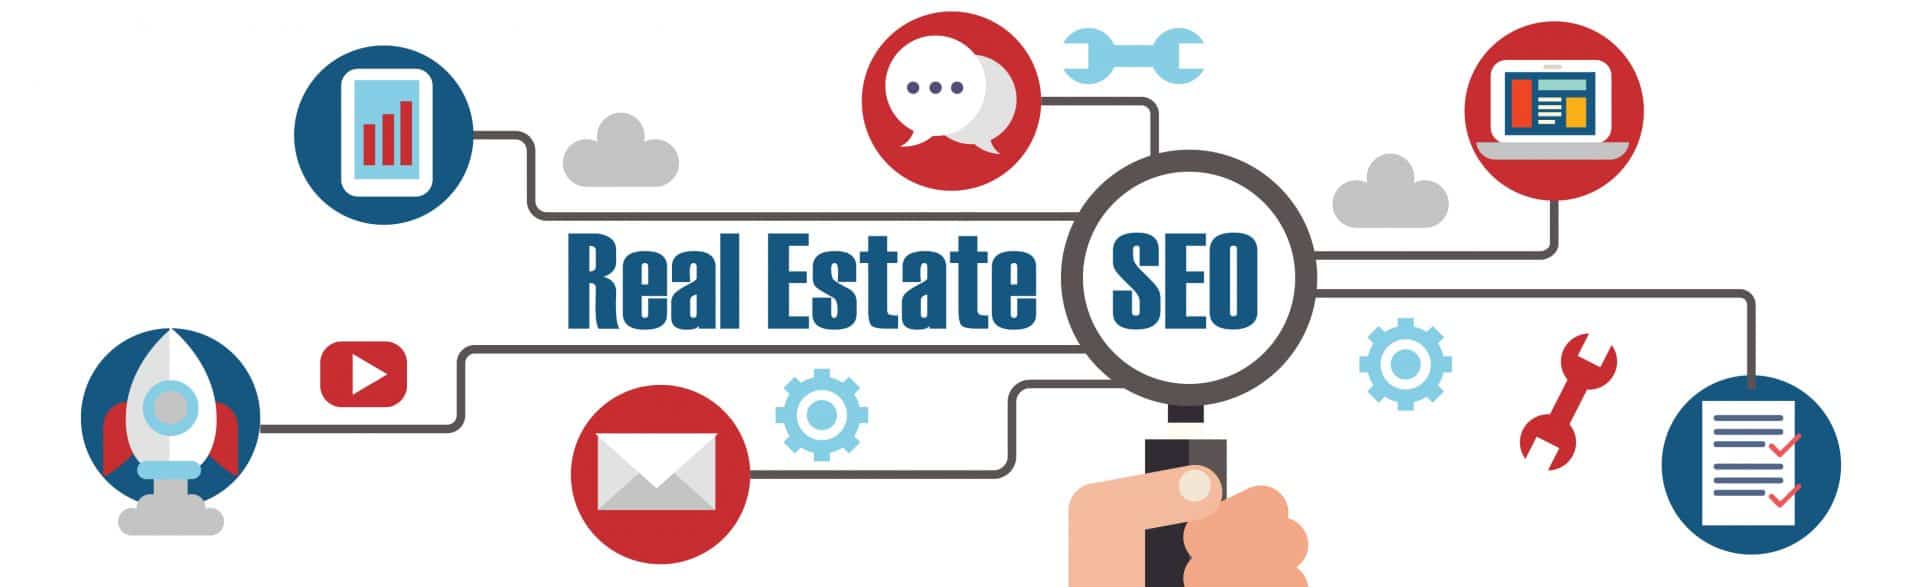 Real Estate SEO for 2020